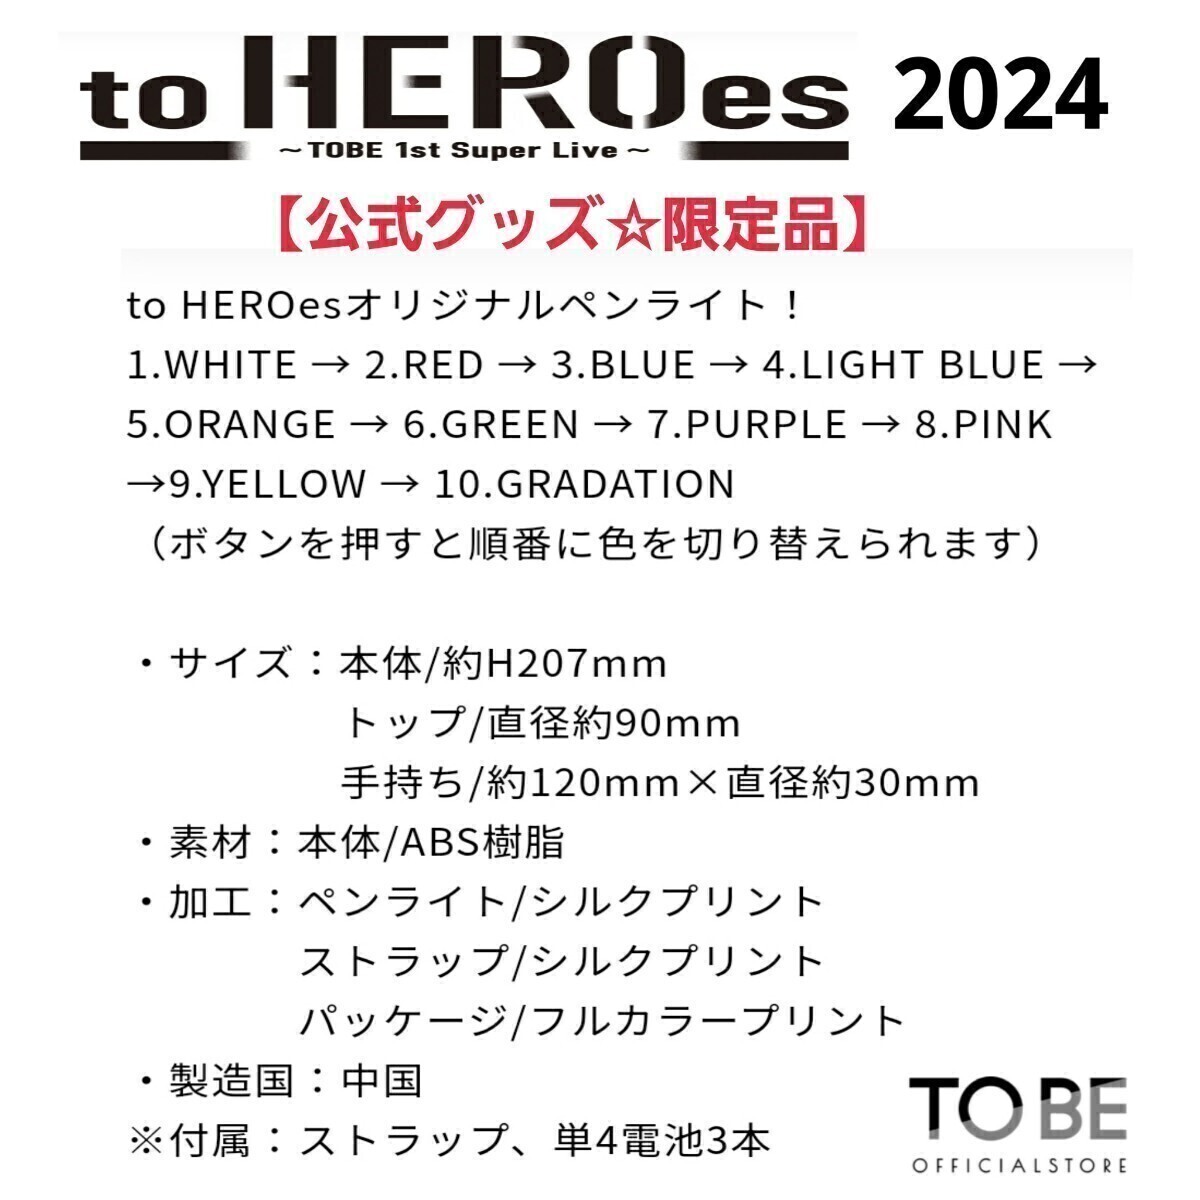  operation verification settled Live limited goods [to HEROes~TOBE 1st Super Live~2024] penlight official goods Tokyo Dome have Akira Arena IMP./Number_i "uchiwa" fan another exhibition 